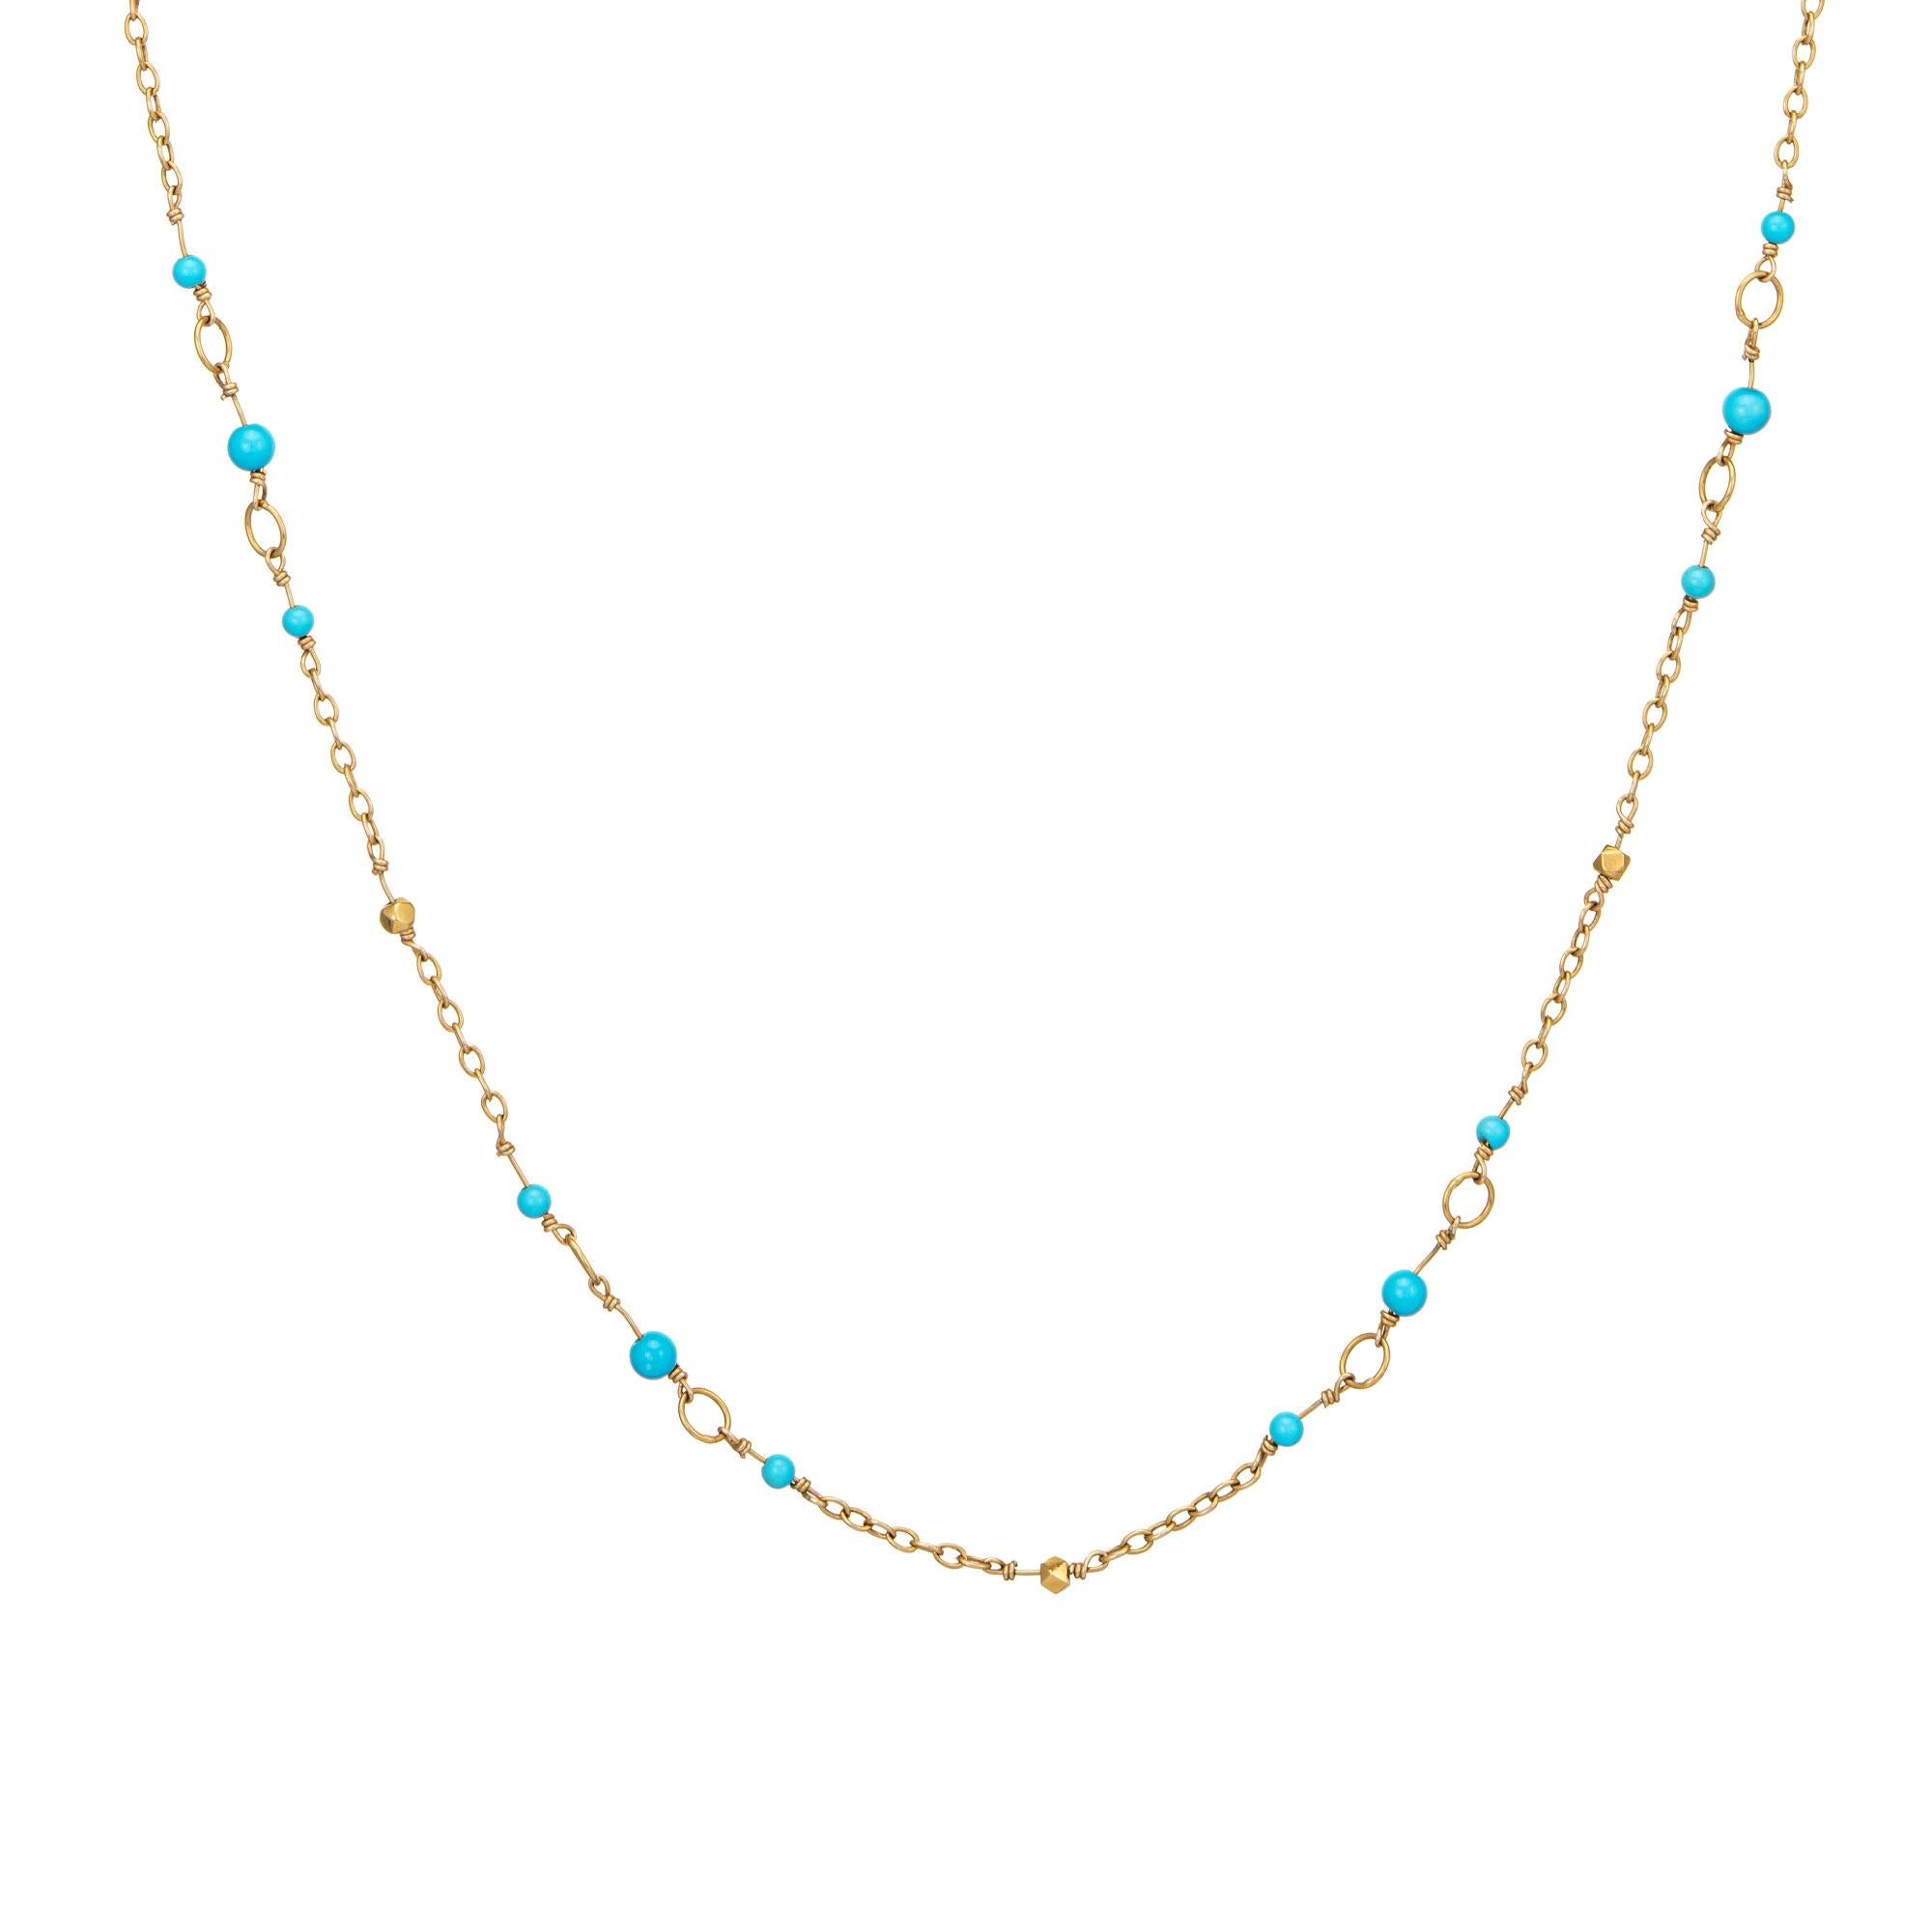 Finely detailed vintage turquoise necklace crafted in 18 karat yellow gold. 

Turquoise beads measure from 2.5mm to 3mm. 
The stylish necklace measures a long 46 inches and is great worn as a long single strand or wrapped as a double strand (and has